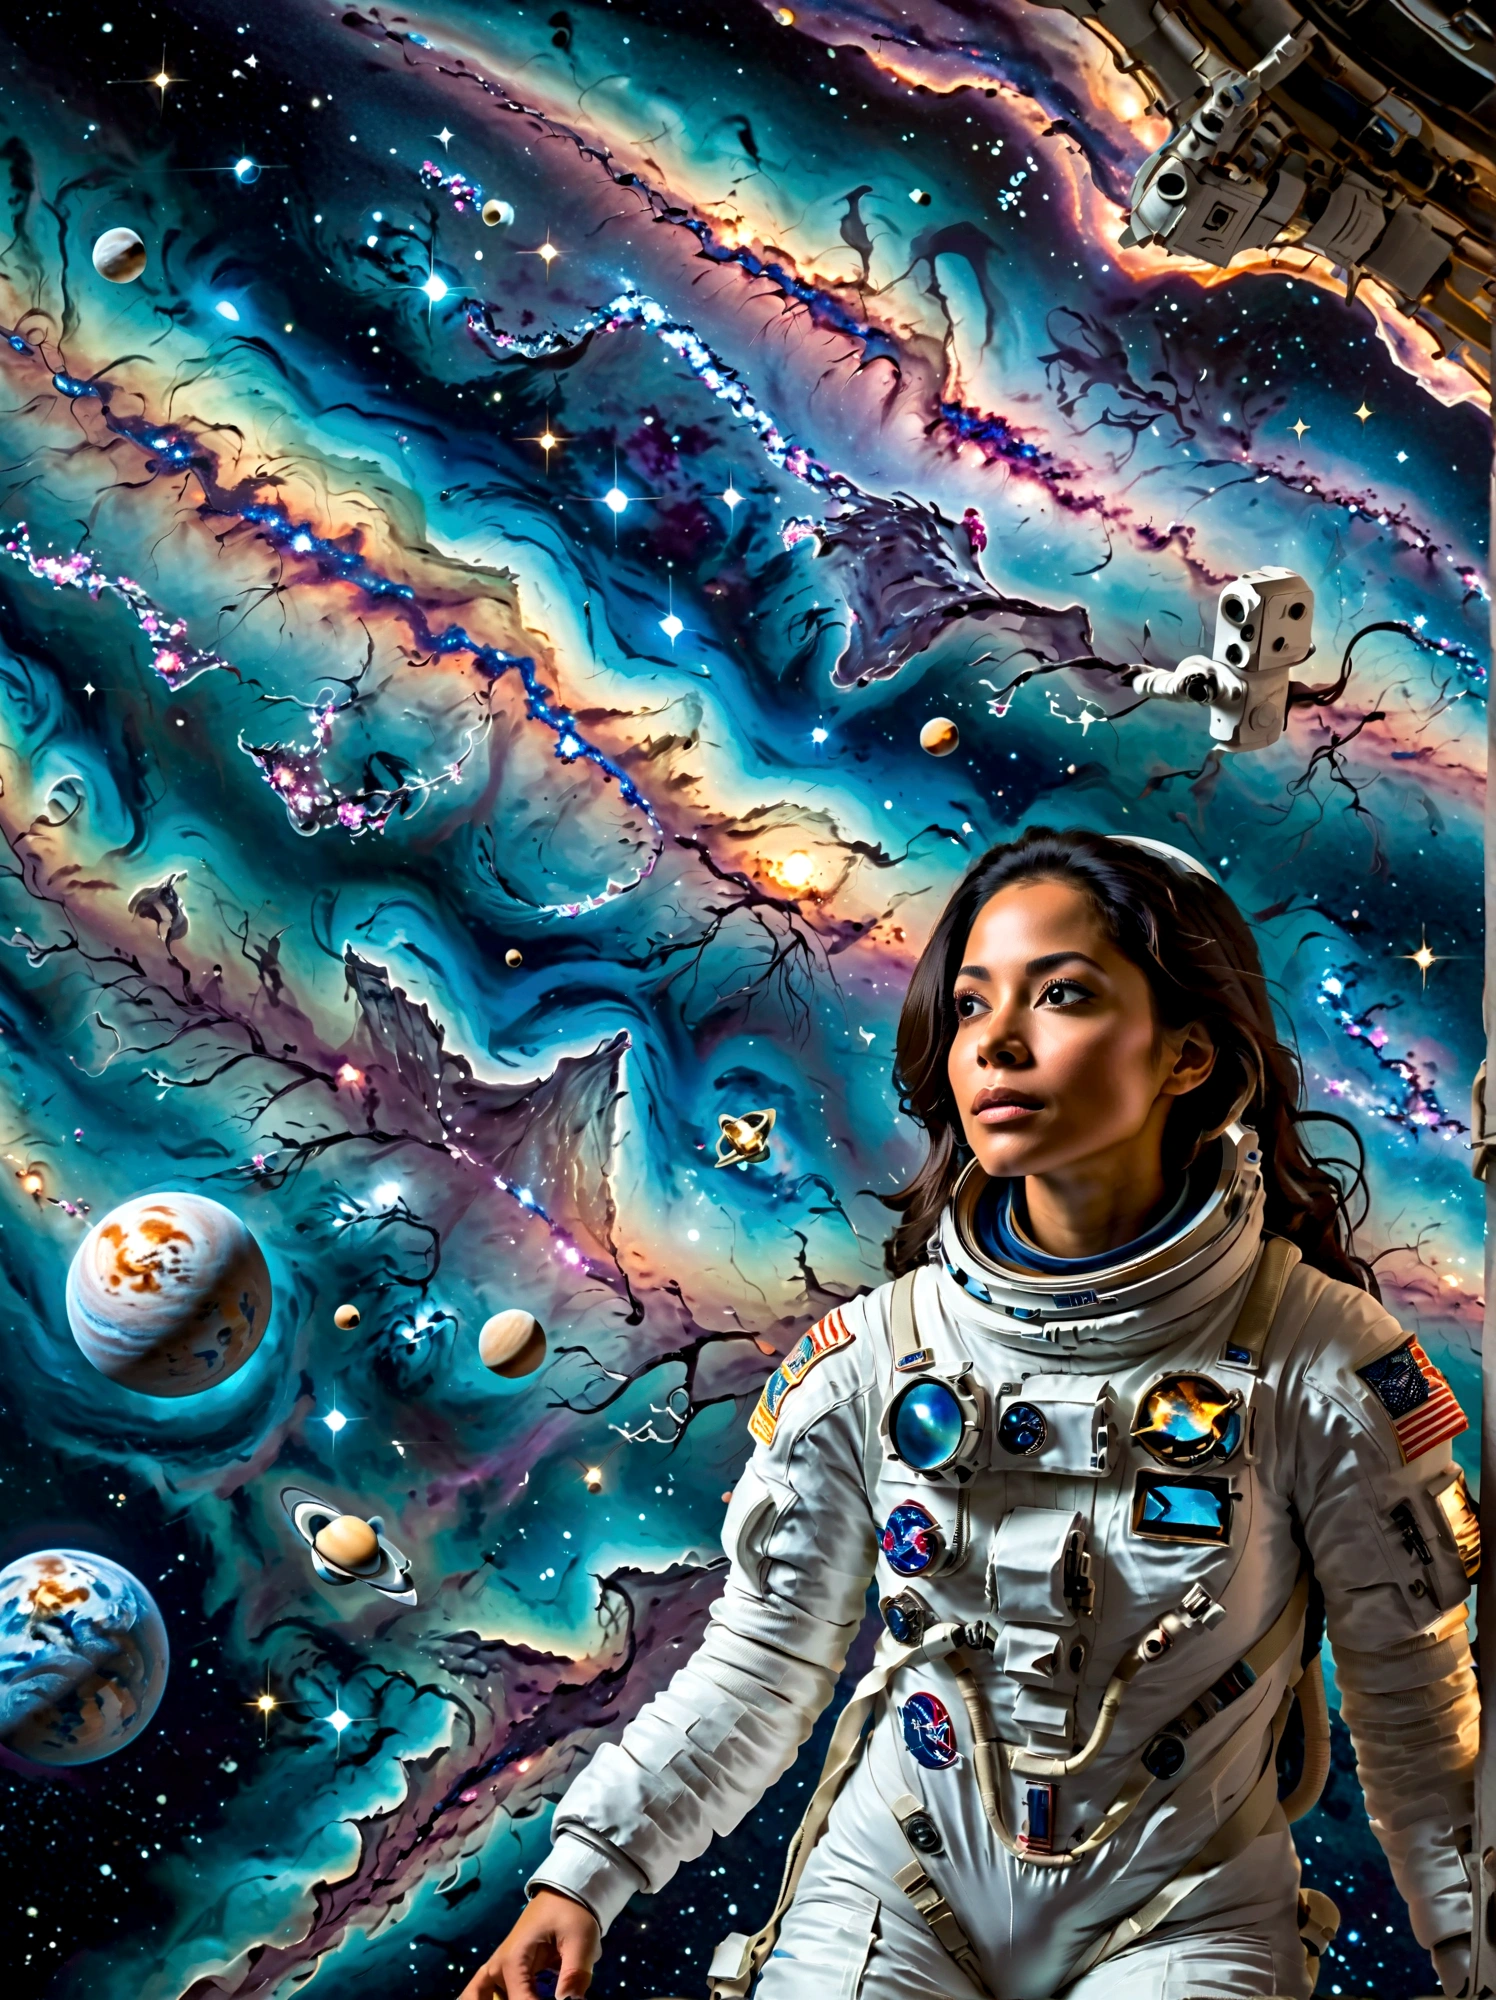 Visualize a scenario in the vast expanse of space. In the foreground, there's a Hispanic female astronaut, completely suited up in a detailed spacesuit, elegantly floating in zero gravity. She's gazing at an alien creature, who's also hovering nearby. The alien is fascinating with multiple appendages, shiny azure skin, large eyes that shimmer in the starlight, and emits a soft bioluminescent glow. The backdrop is filled with millions of stars, the dark void of space, and a giant swirling galaxy. Both beings, despite their differences, seem to communicate in peaceful harmony.